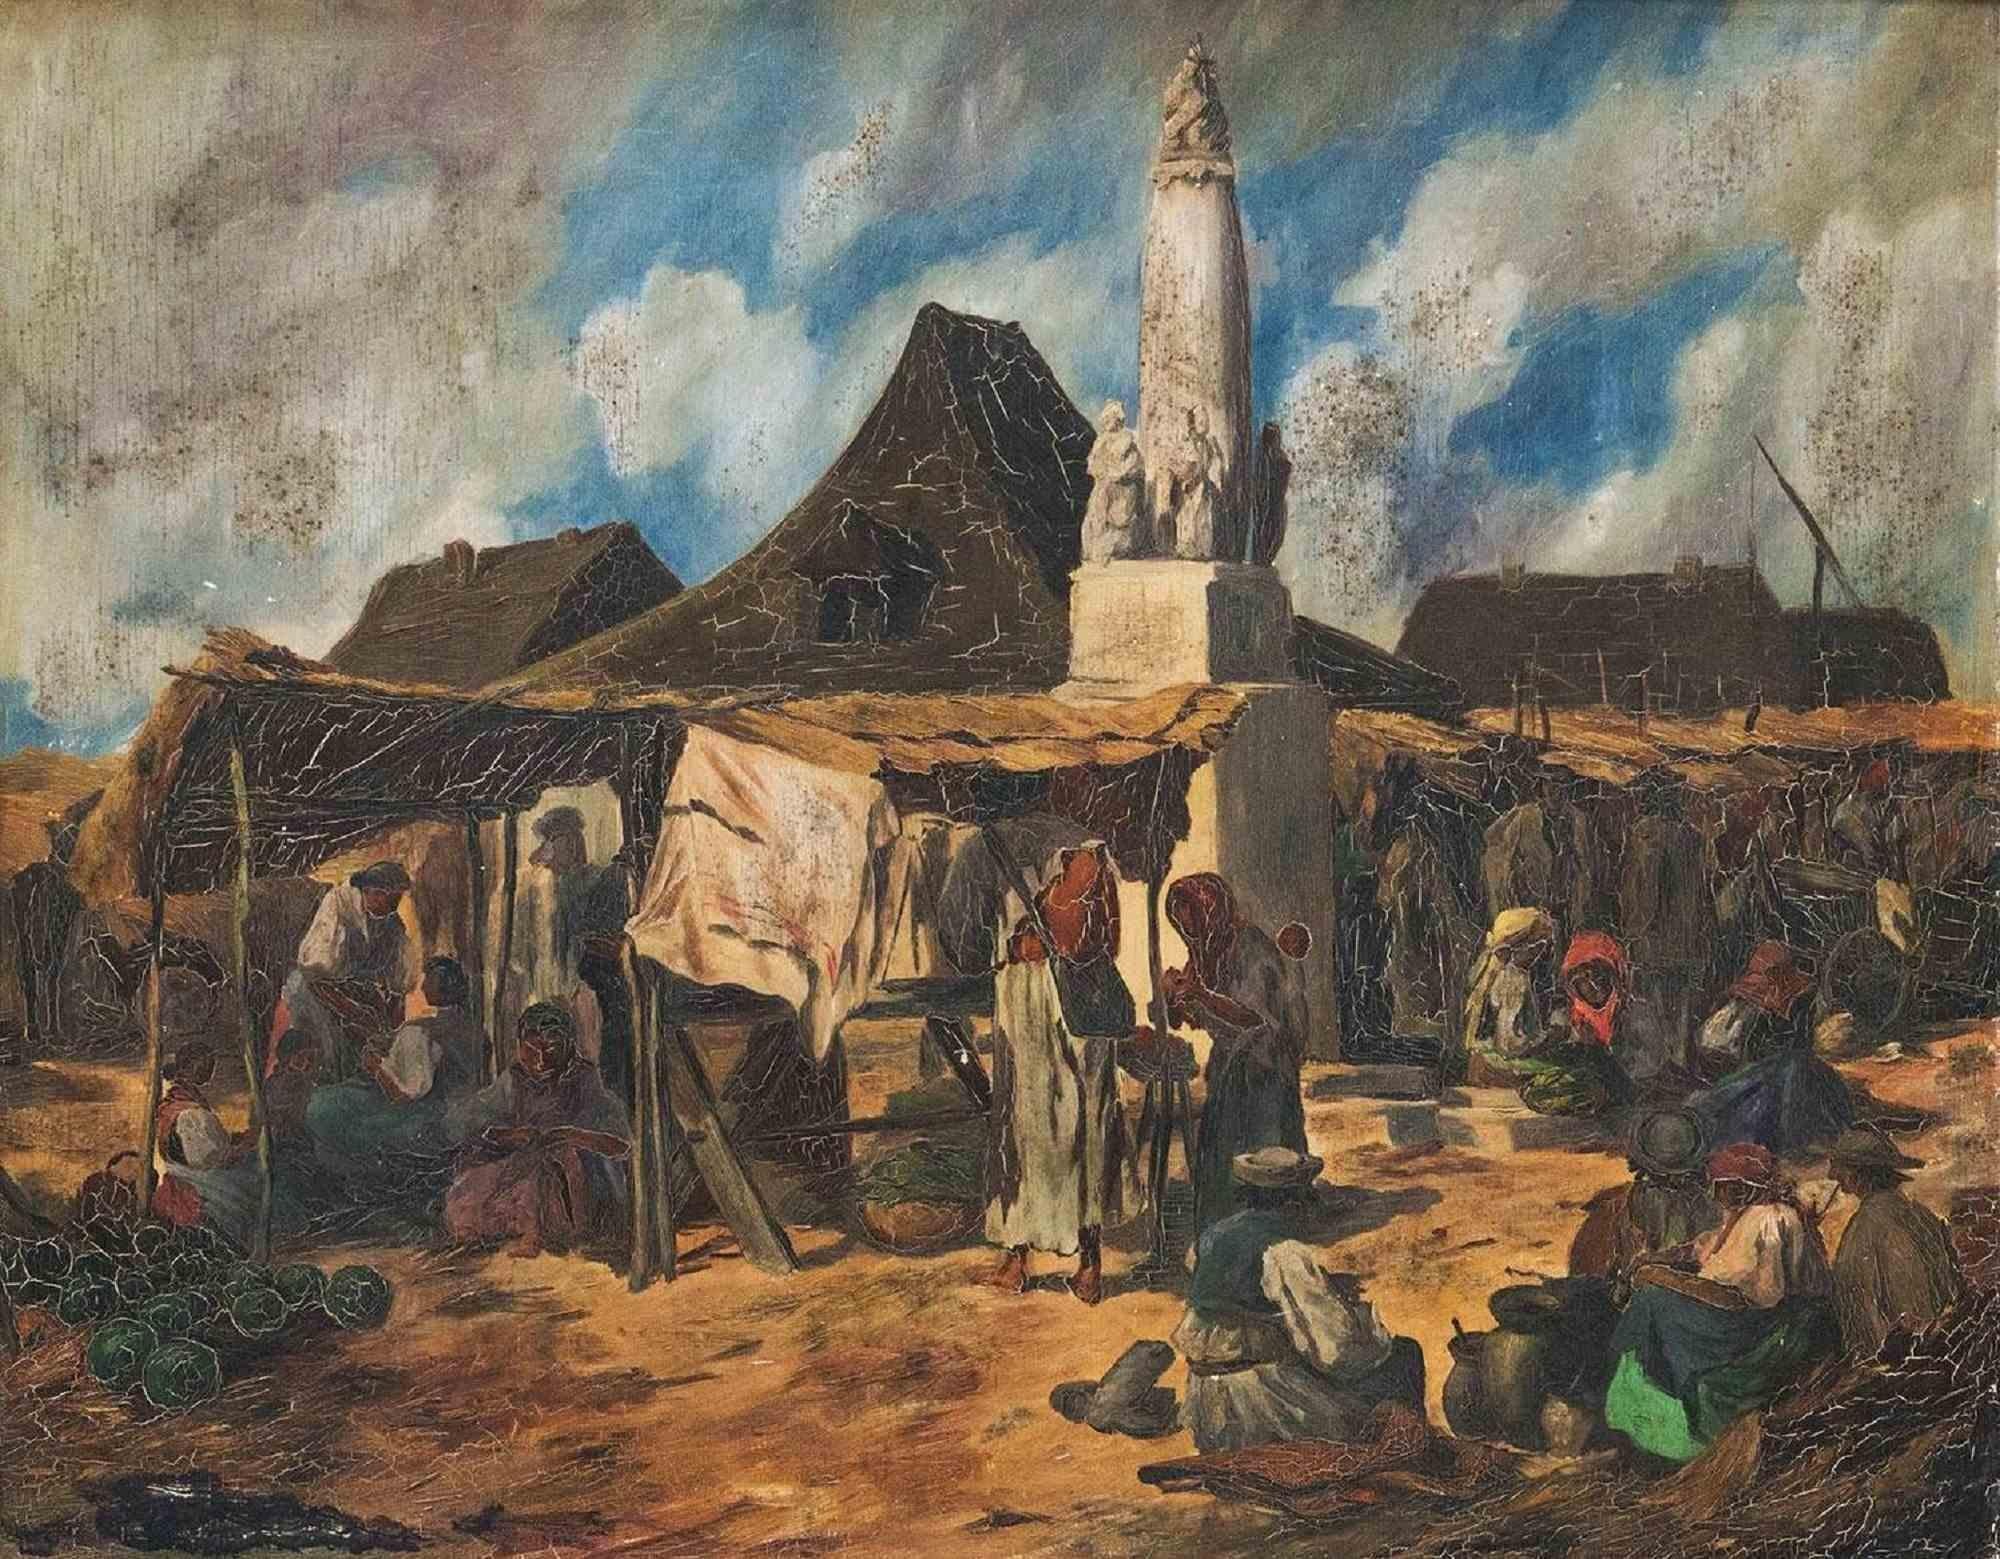 Unknown Landscape Painting - Market in the Puszta - Oil on Board - 19th Century